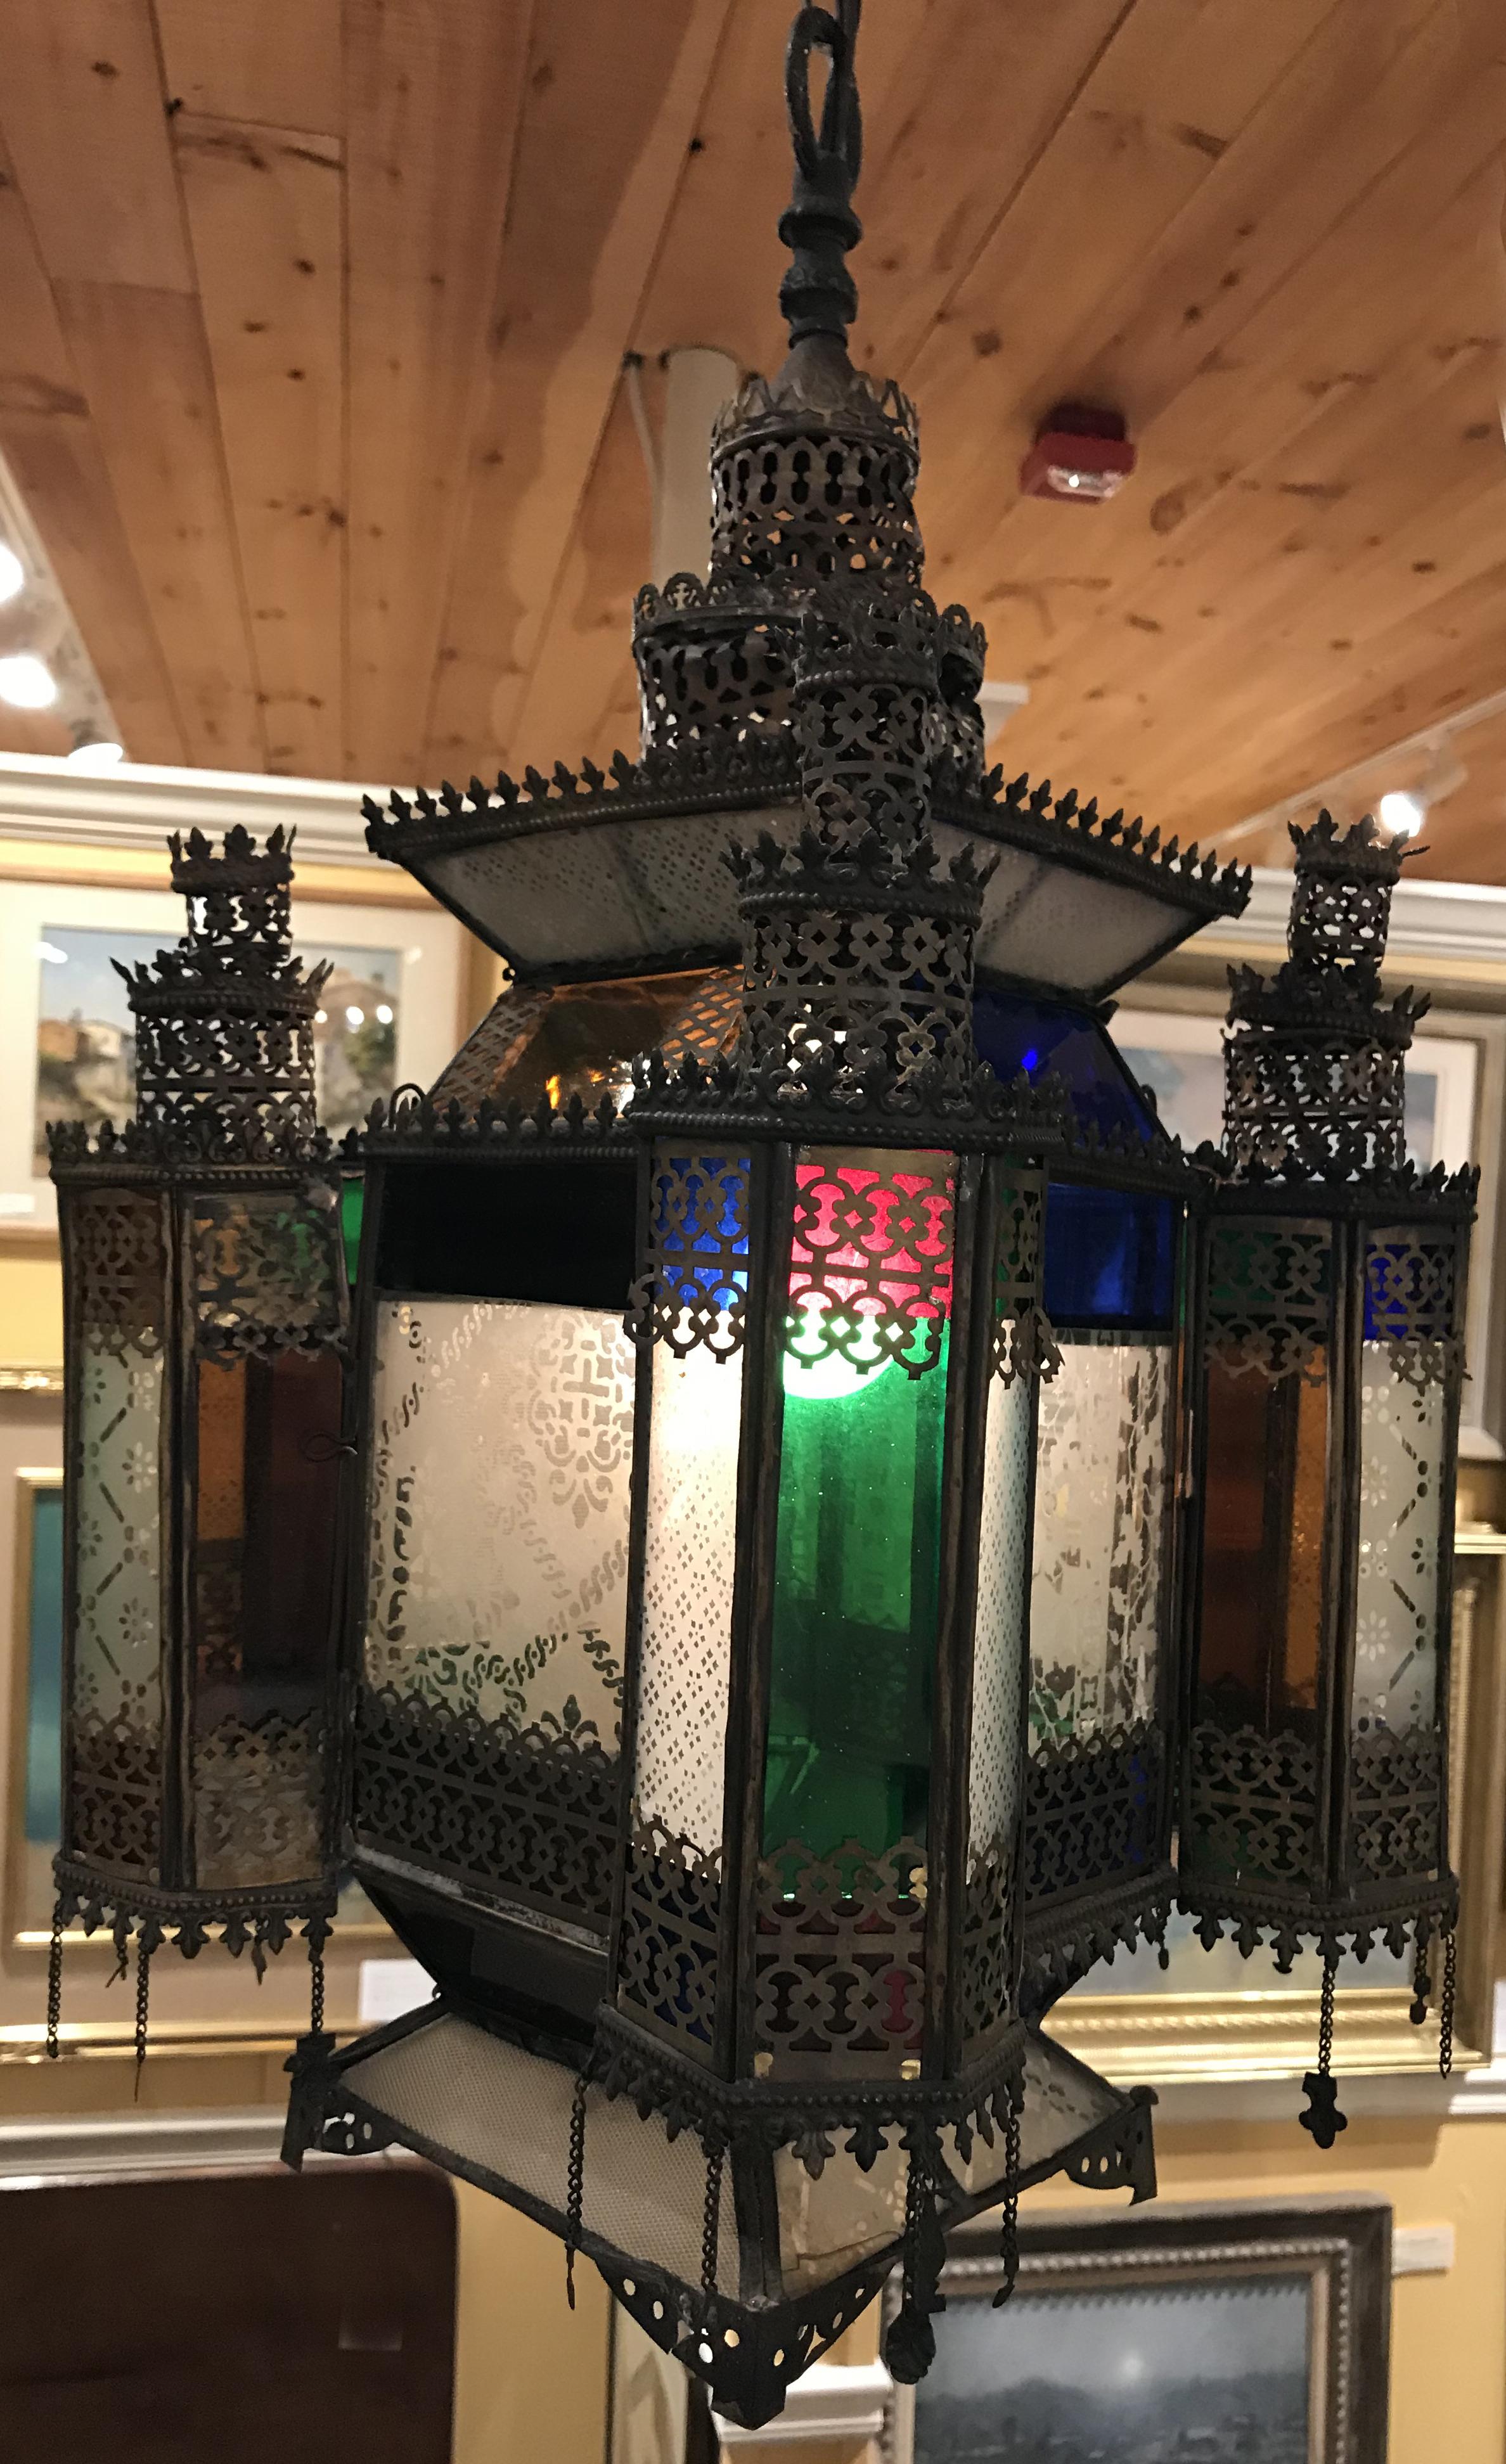 A fine example of a Moroccan hanging reticulated metal pendant lamp or lantern, with four large clear panels etched with foliate and geometric designs, accented with turret corners with various colored smaller panels, surrounding a single central